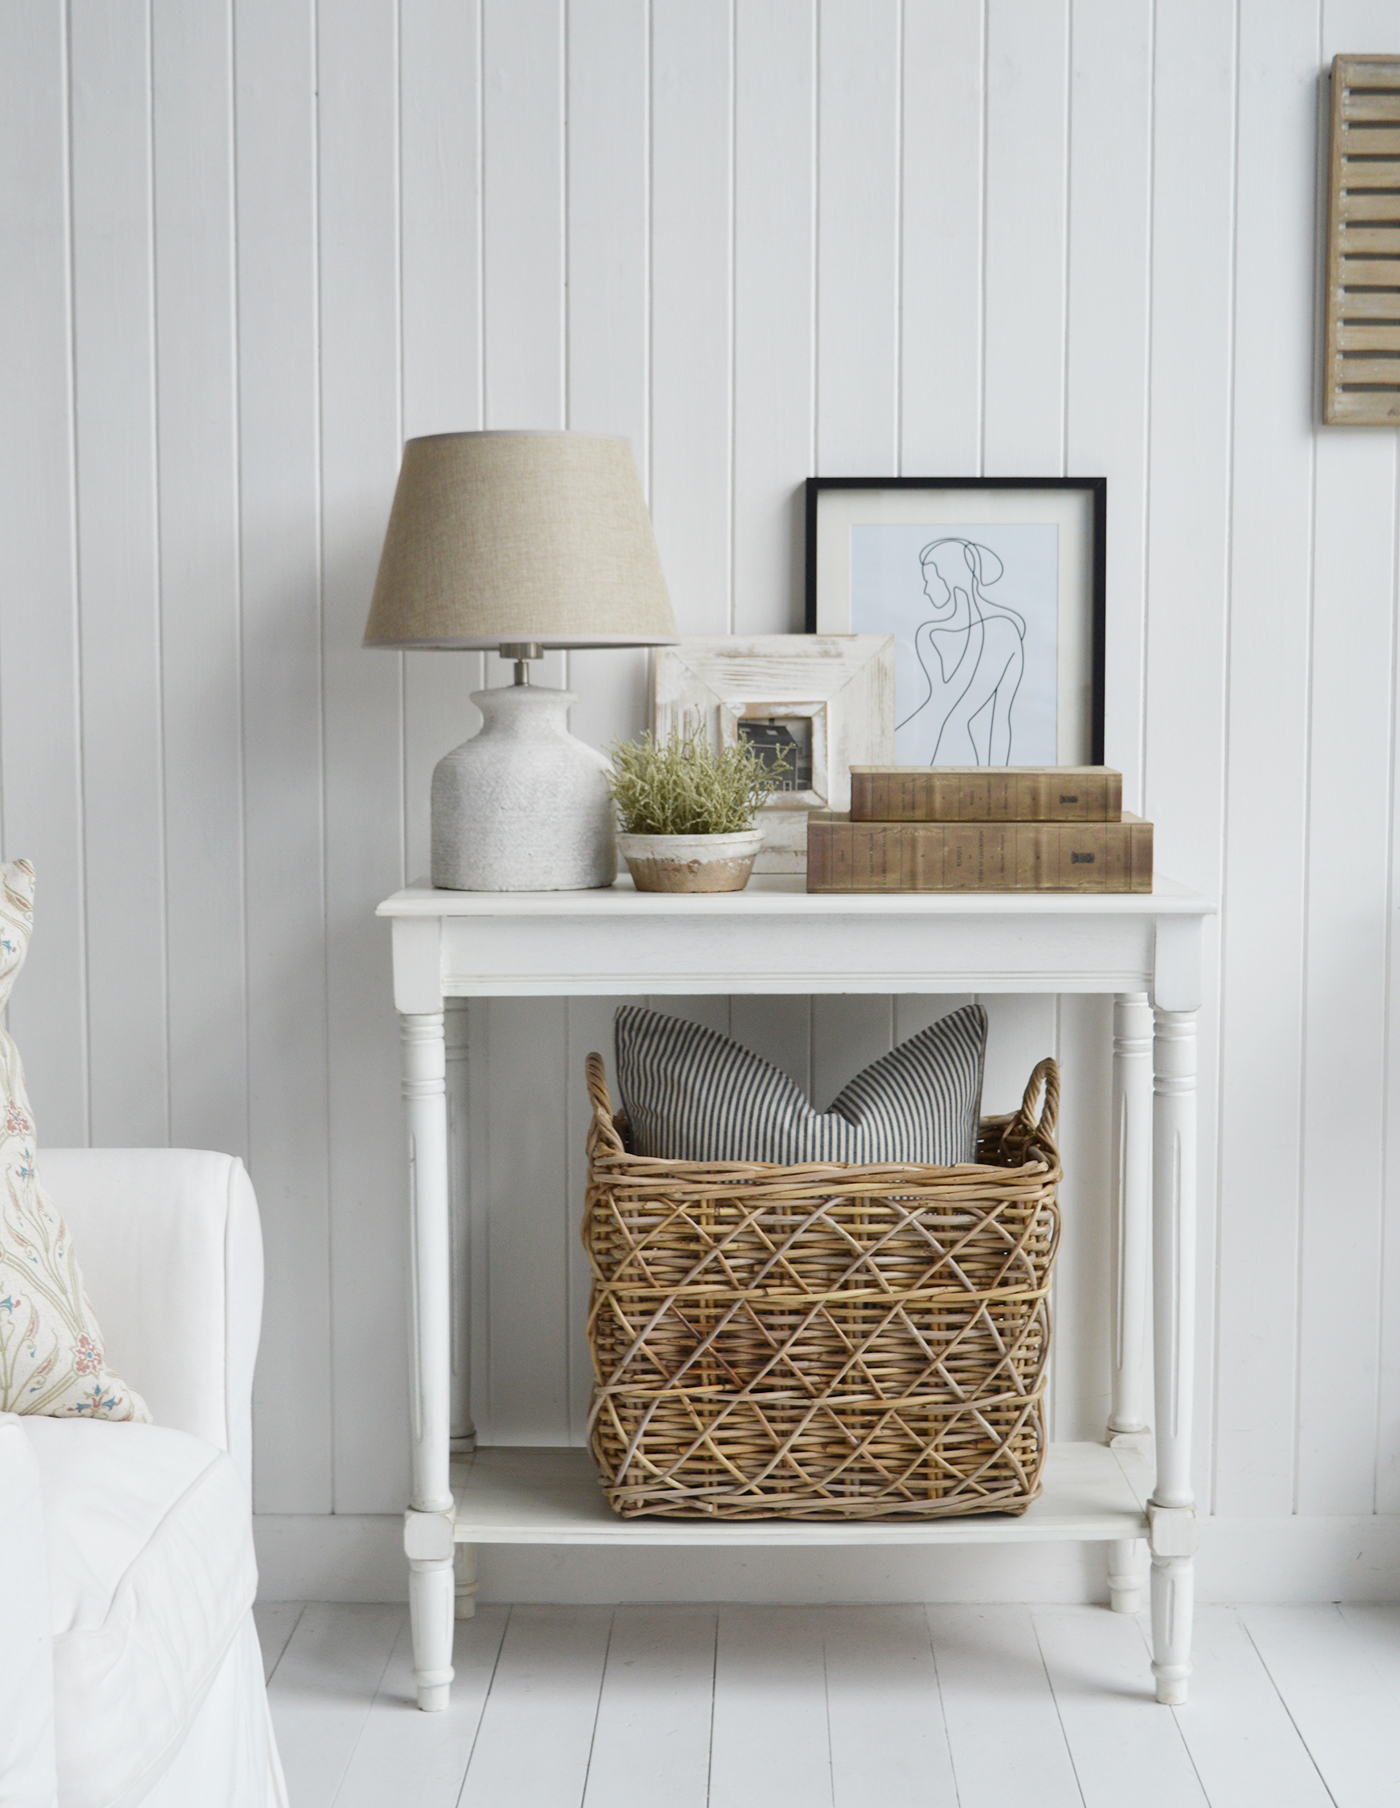 The Cape Ann range of White furniture from The White Lighthouse. A  white console table with a shelf for hallway and living room furniture in New England, coastal, country and city homes